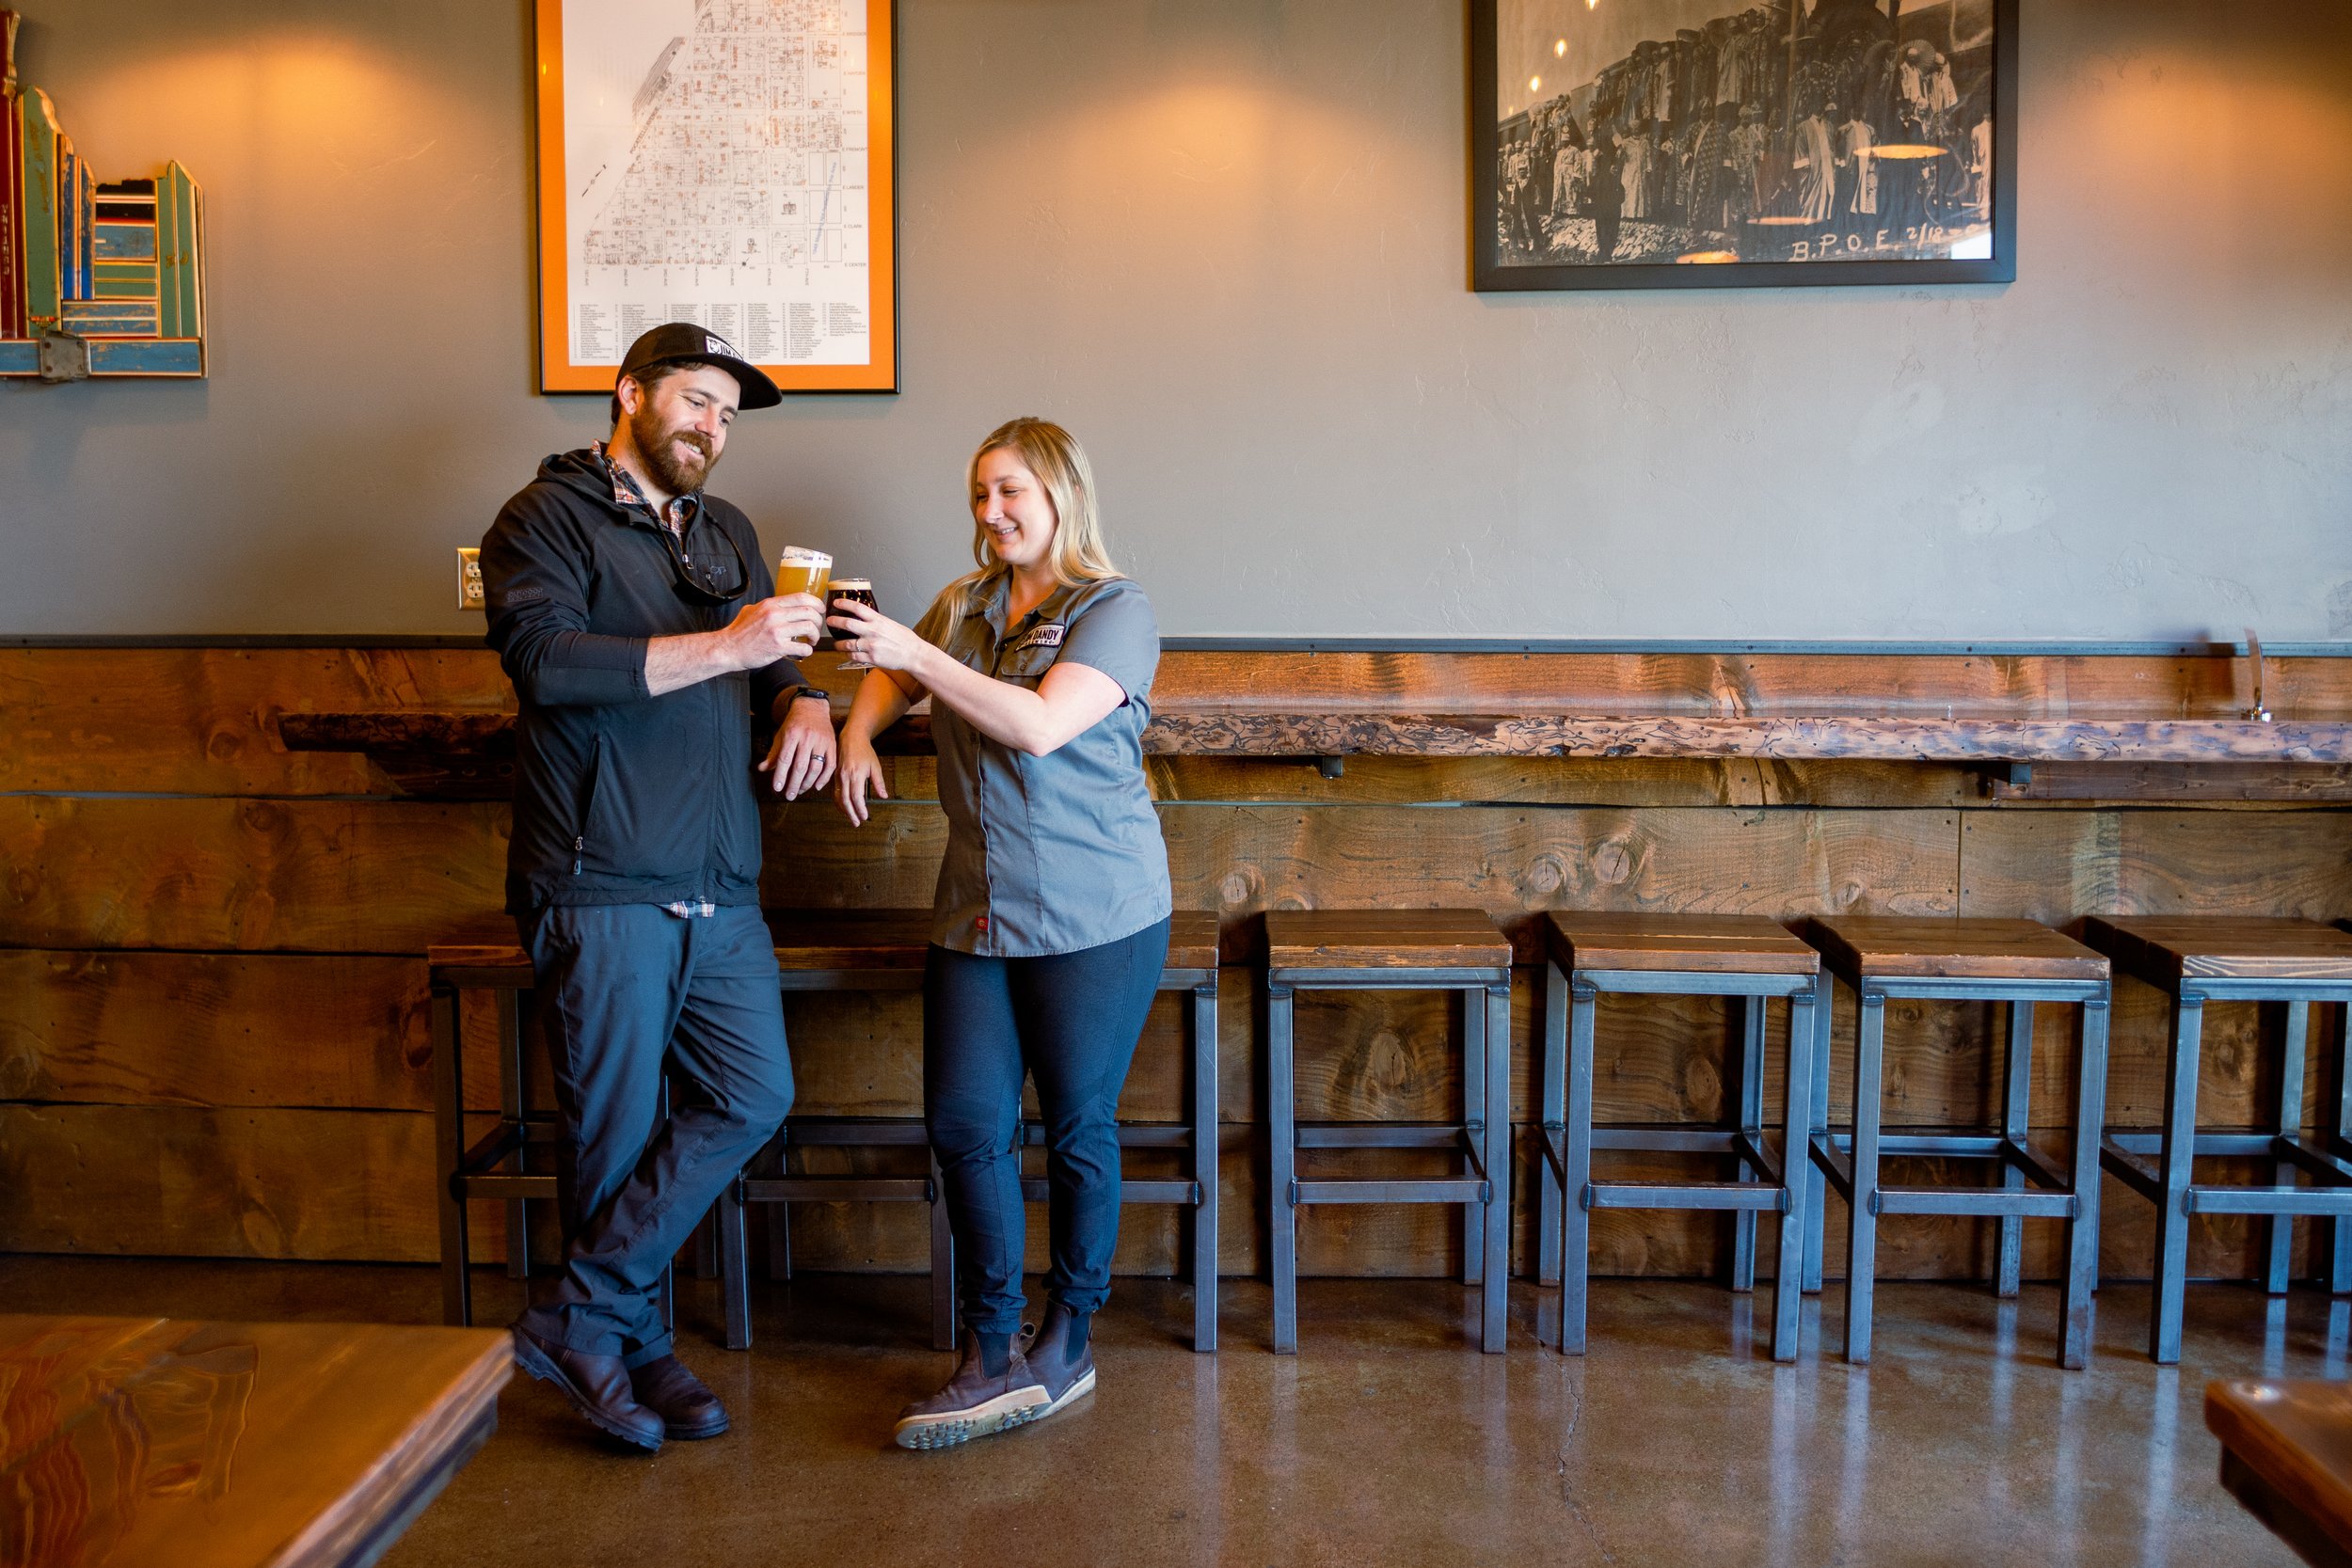  Jim Dandy Brewing owners Davis and Hailee Gove lift a glass in their Pocatello brewery. 